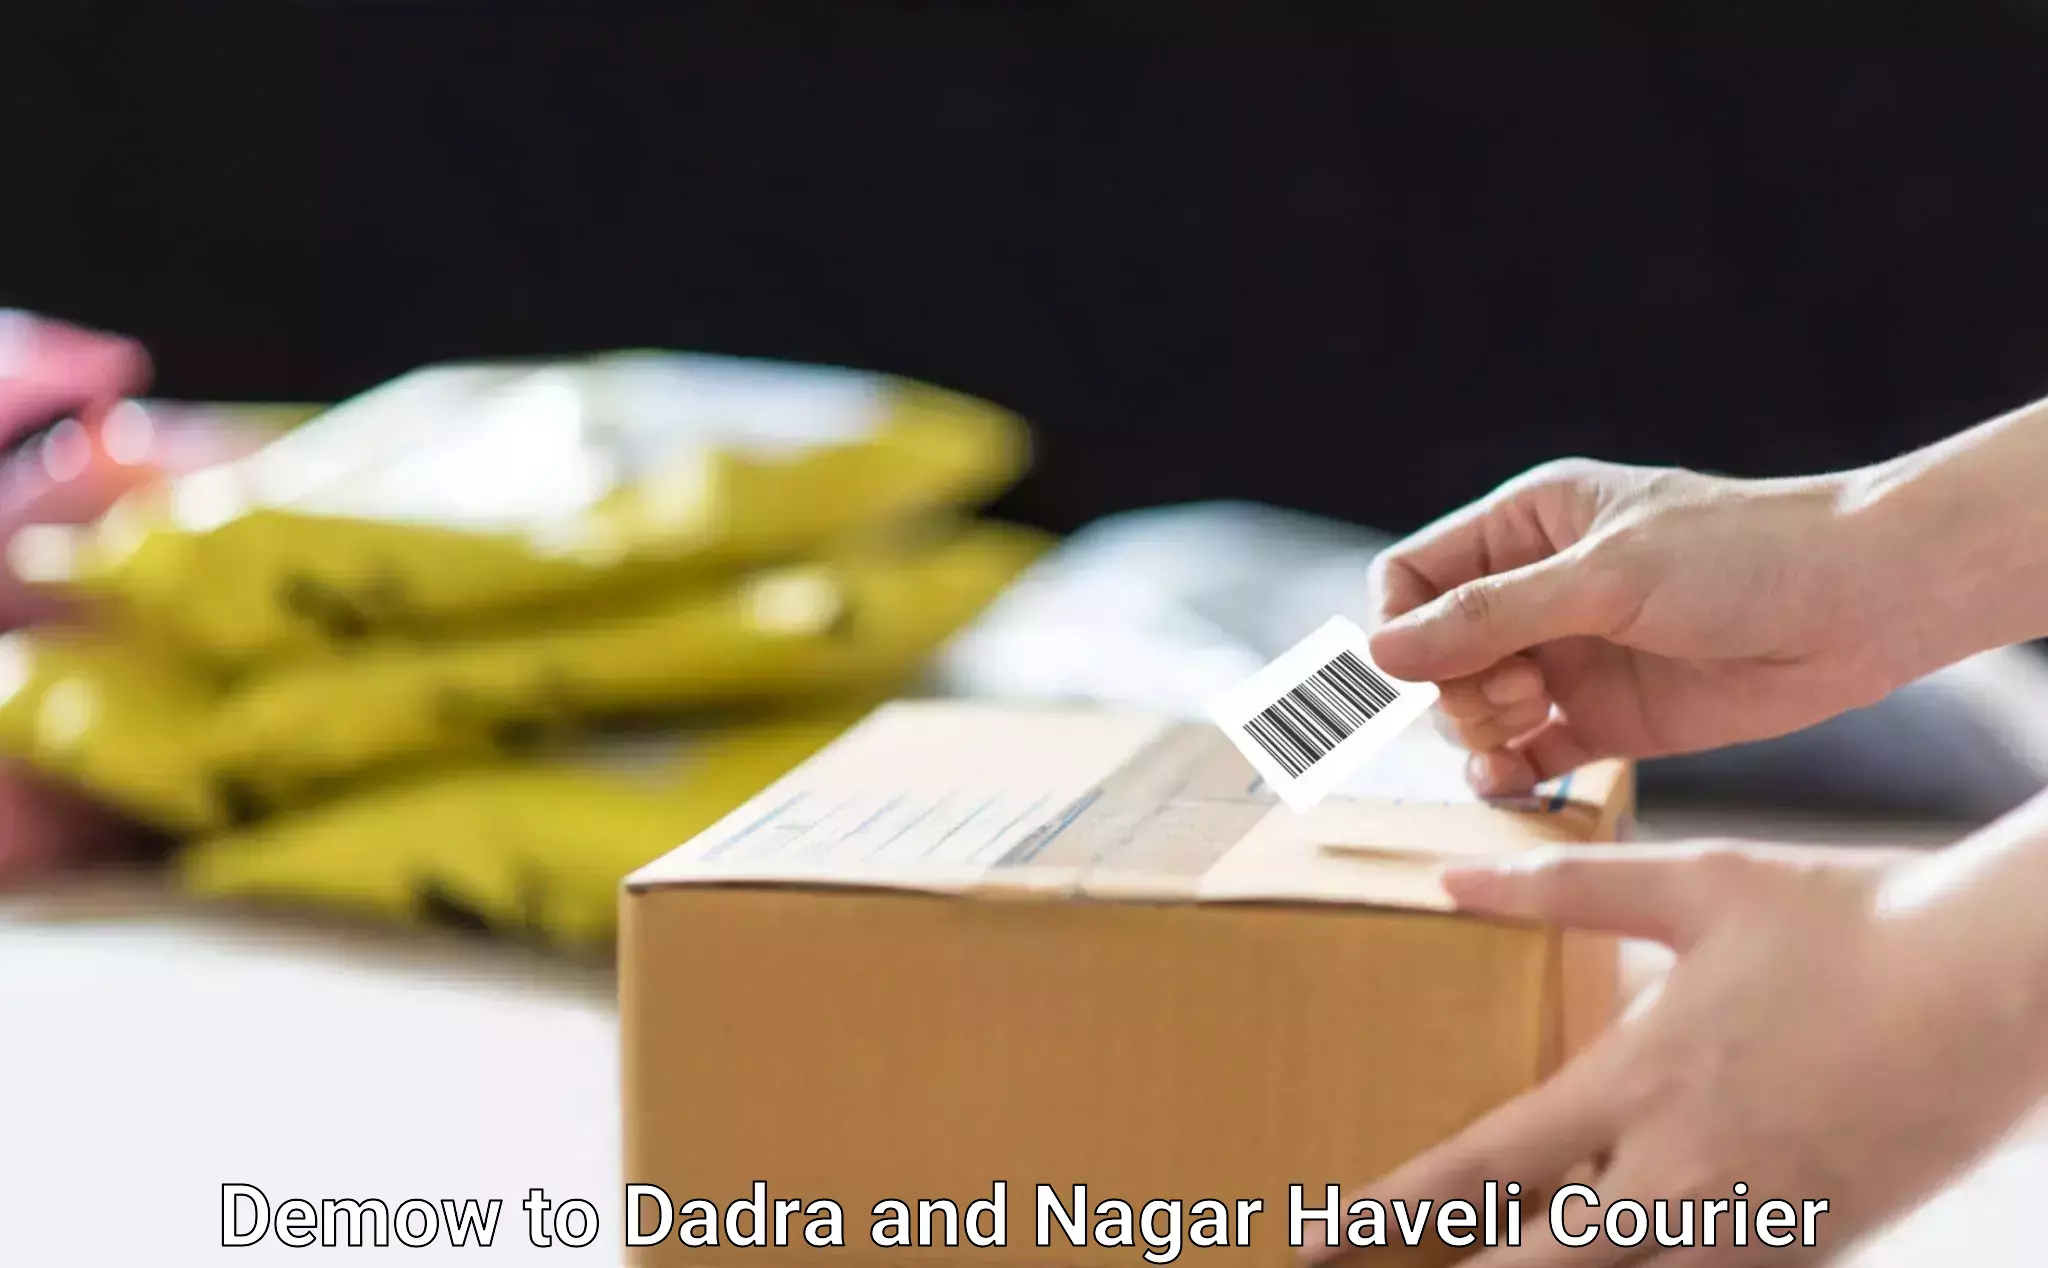 Custom courier packaging Demow to Dadra and Nagar Haveli